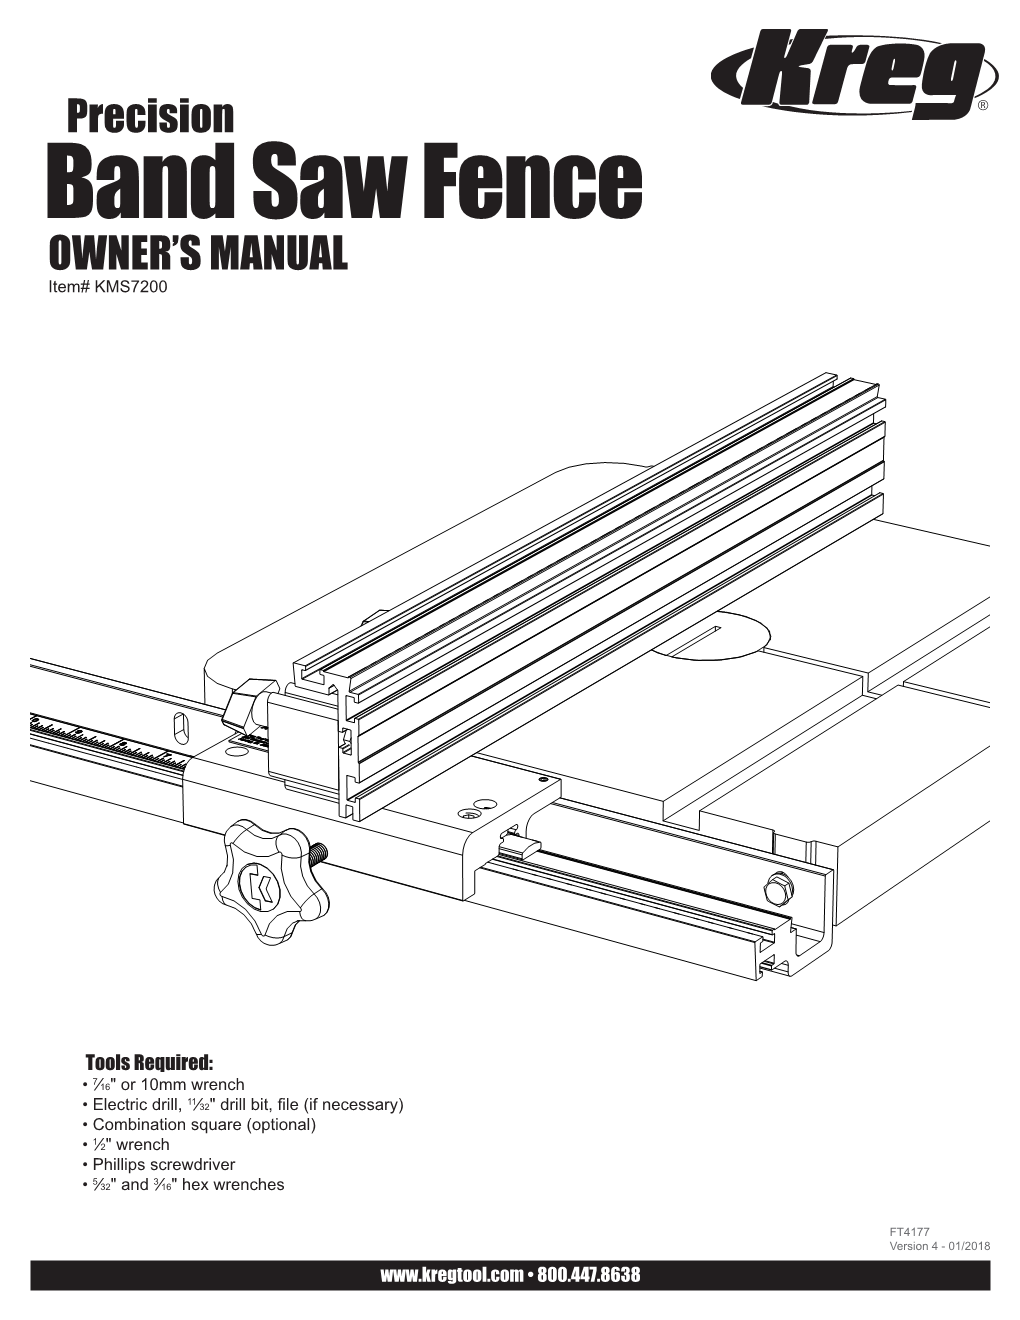 Precision Band Saw Fence OWNER’S MANUAL Item# KMS7200